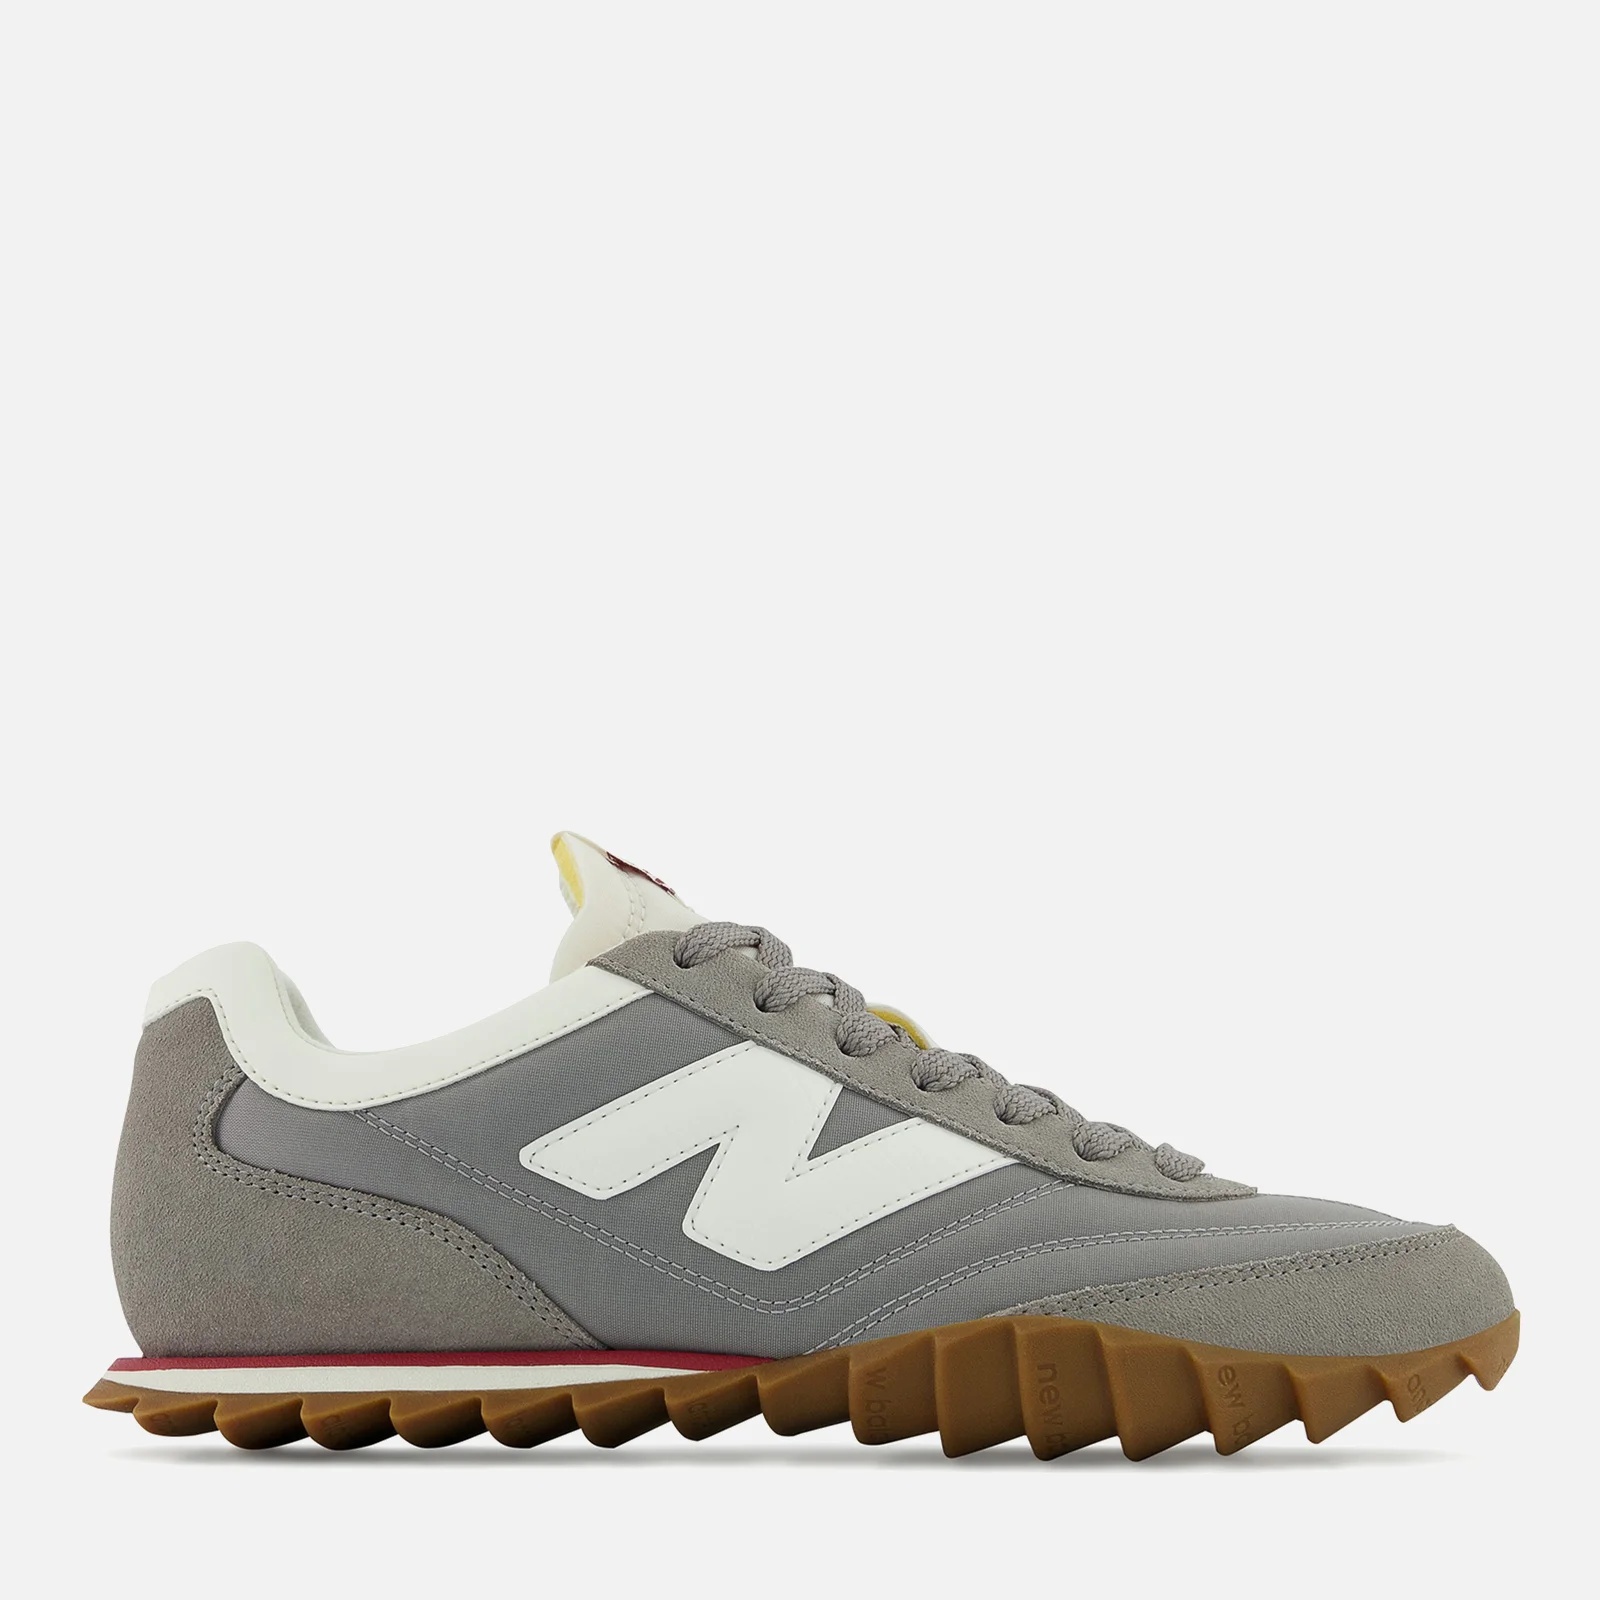 New Balance Men's Rc30 Trainers - Marblehead Image 1